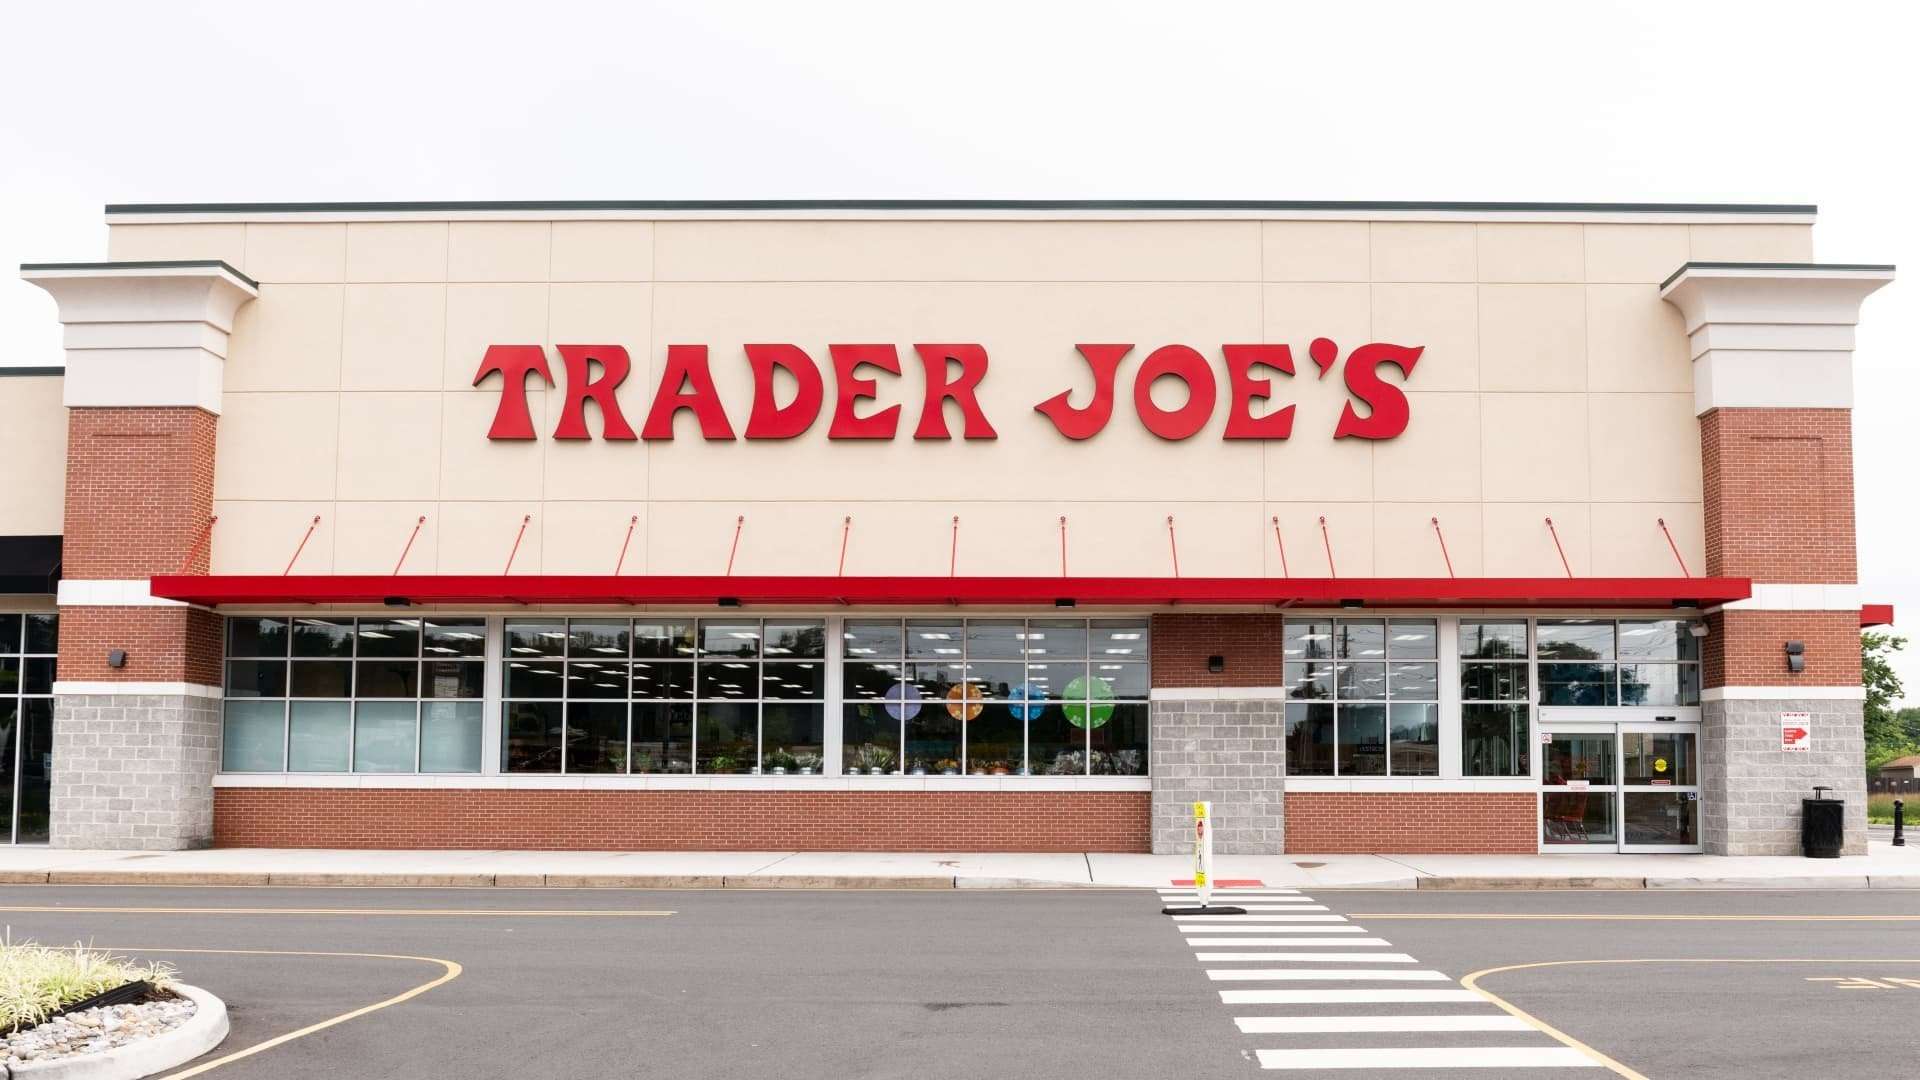 image for Trader Joe's chicken soup dumplings recalled for possibly containing permanent marker plastic